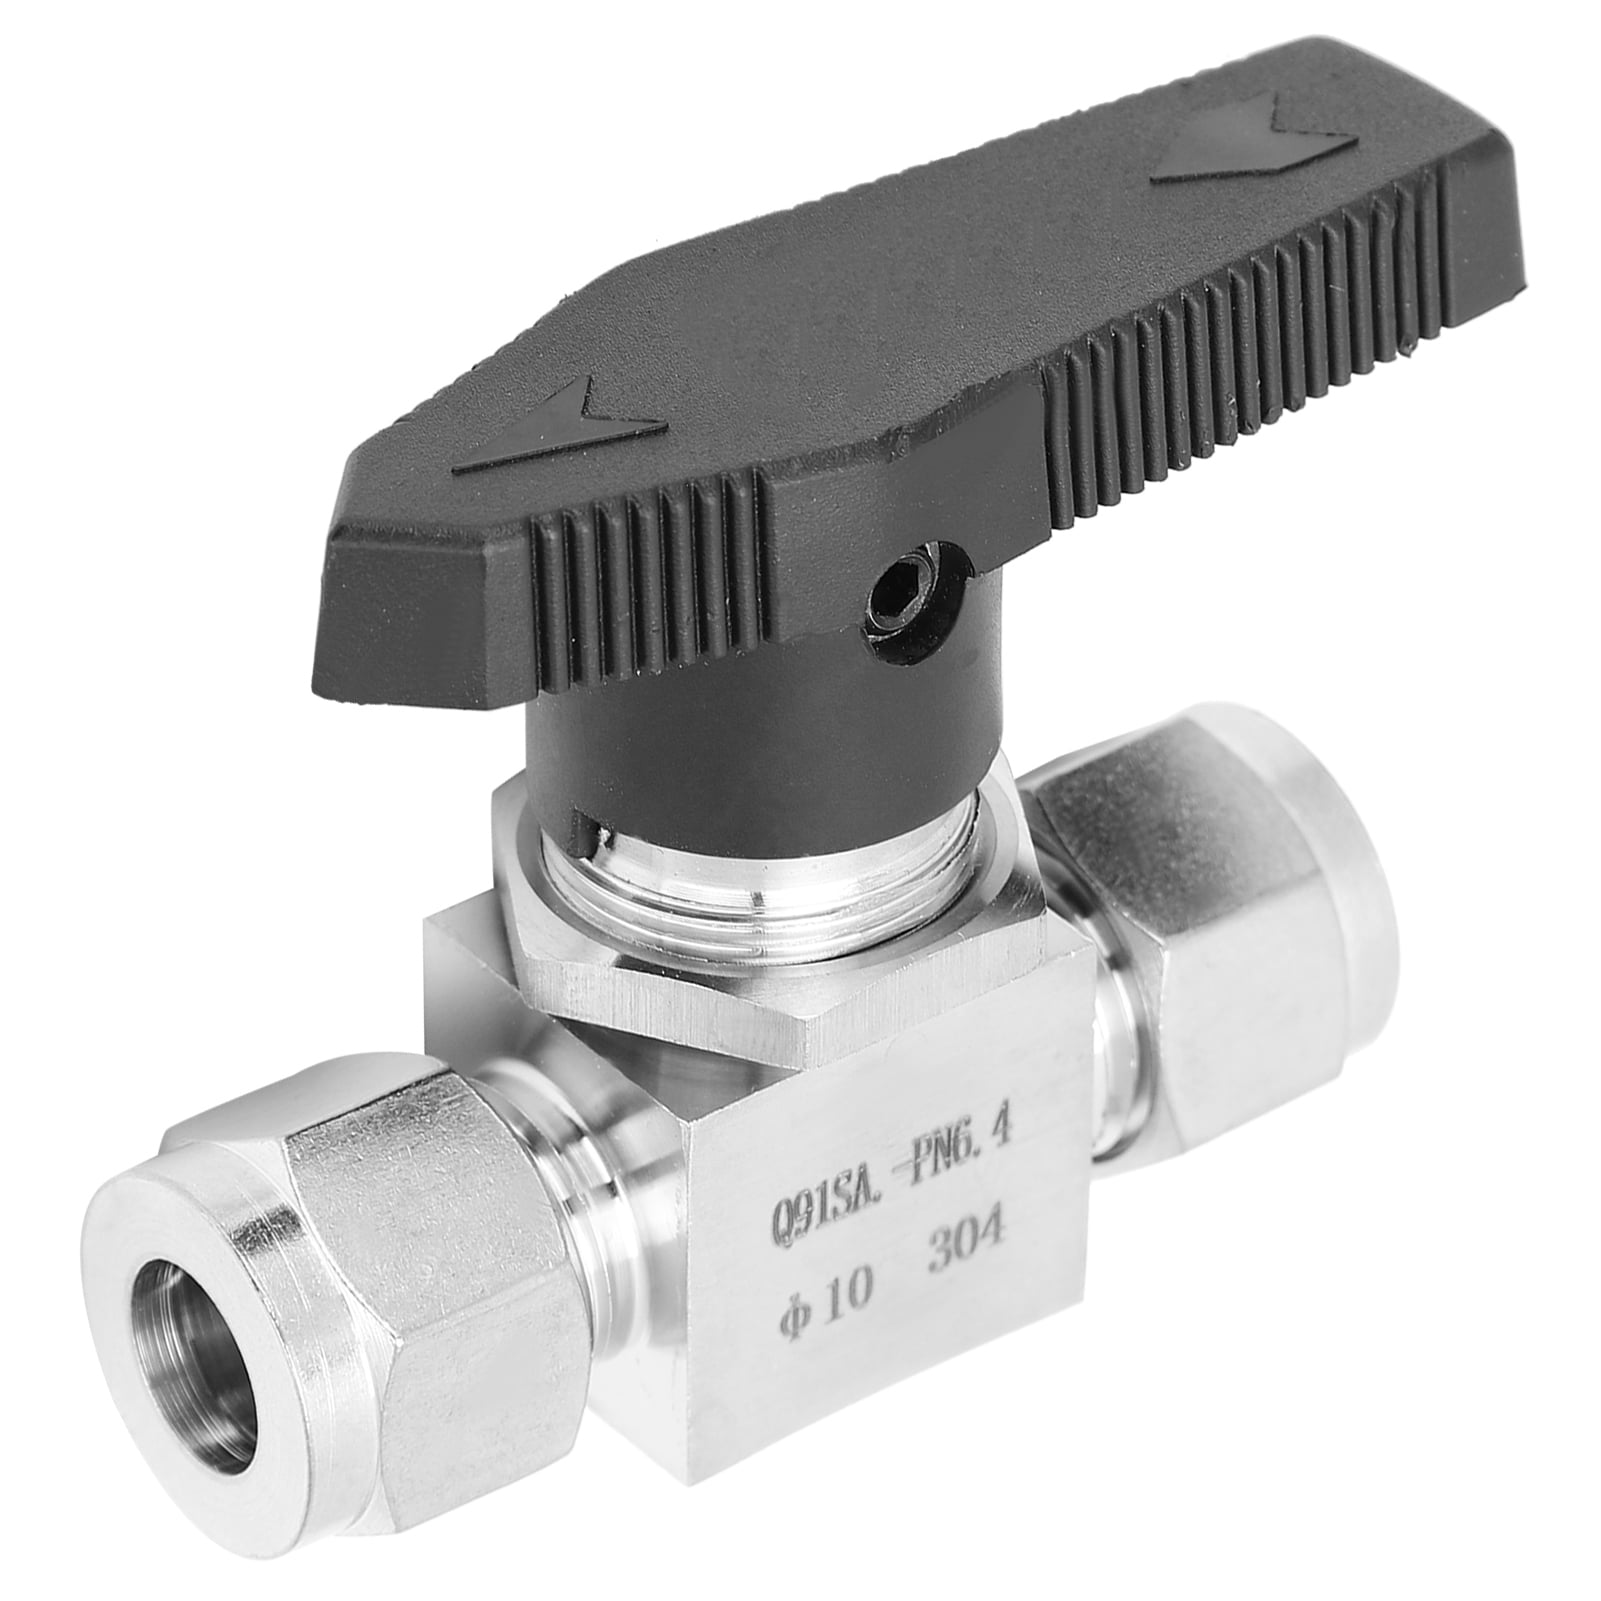 Ф10 304 Stainless Steel Valve Strong Connection Smooth 930Psi Delicate SS‑44S6 Needle Valve for Water Gas Oil Automobile And Shipbuilding Industry 